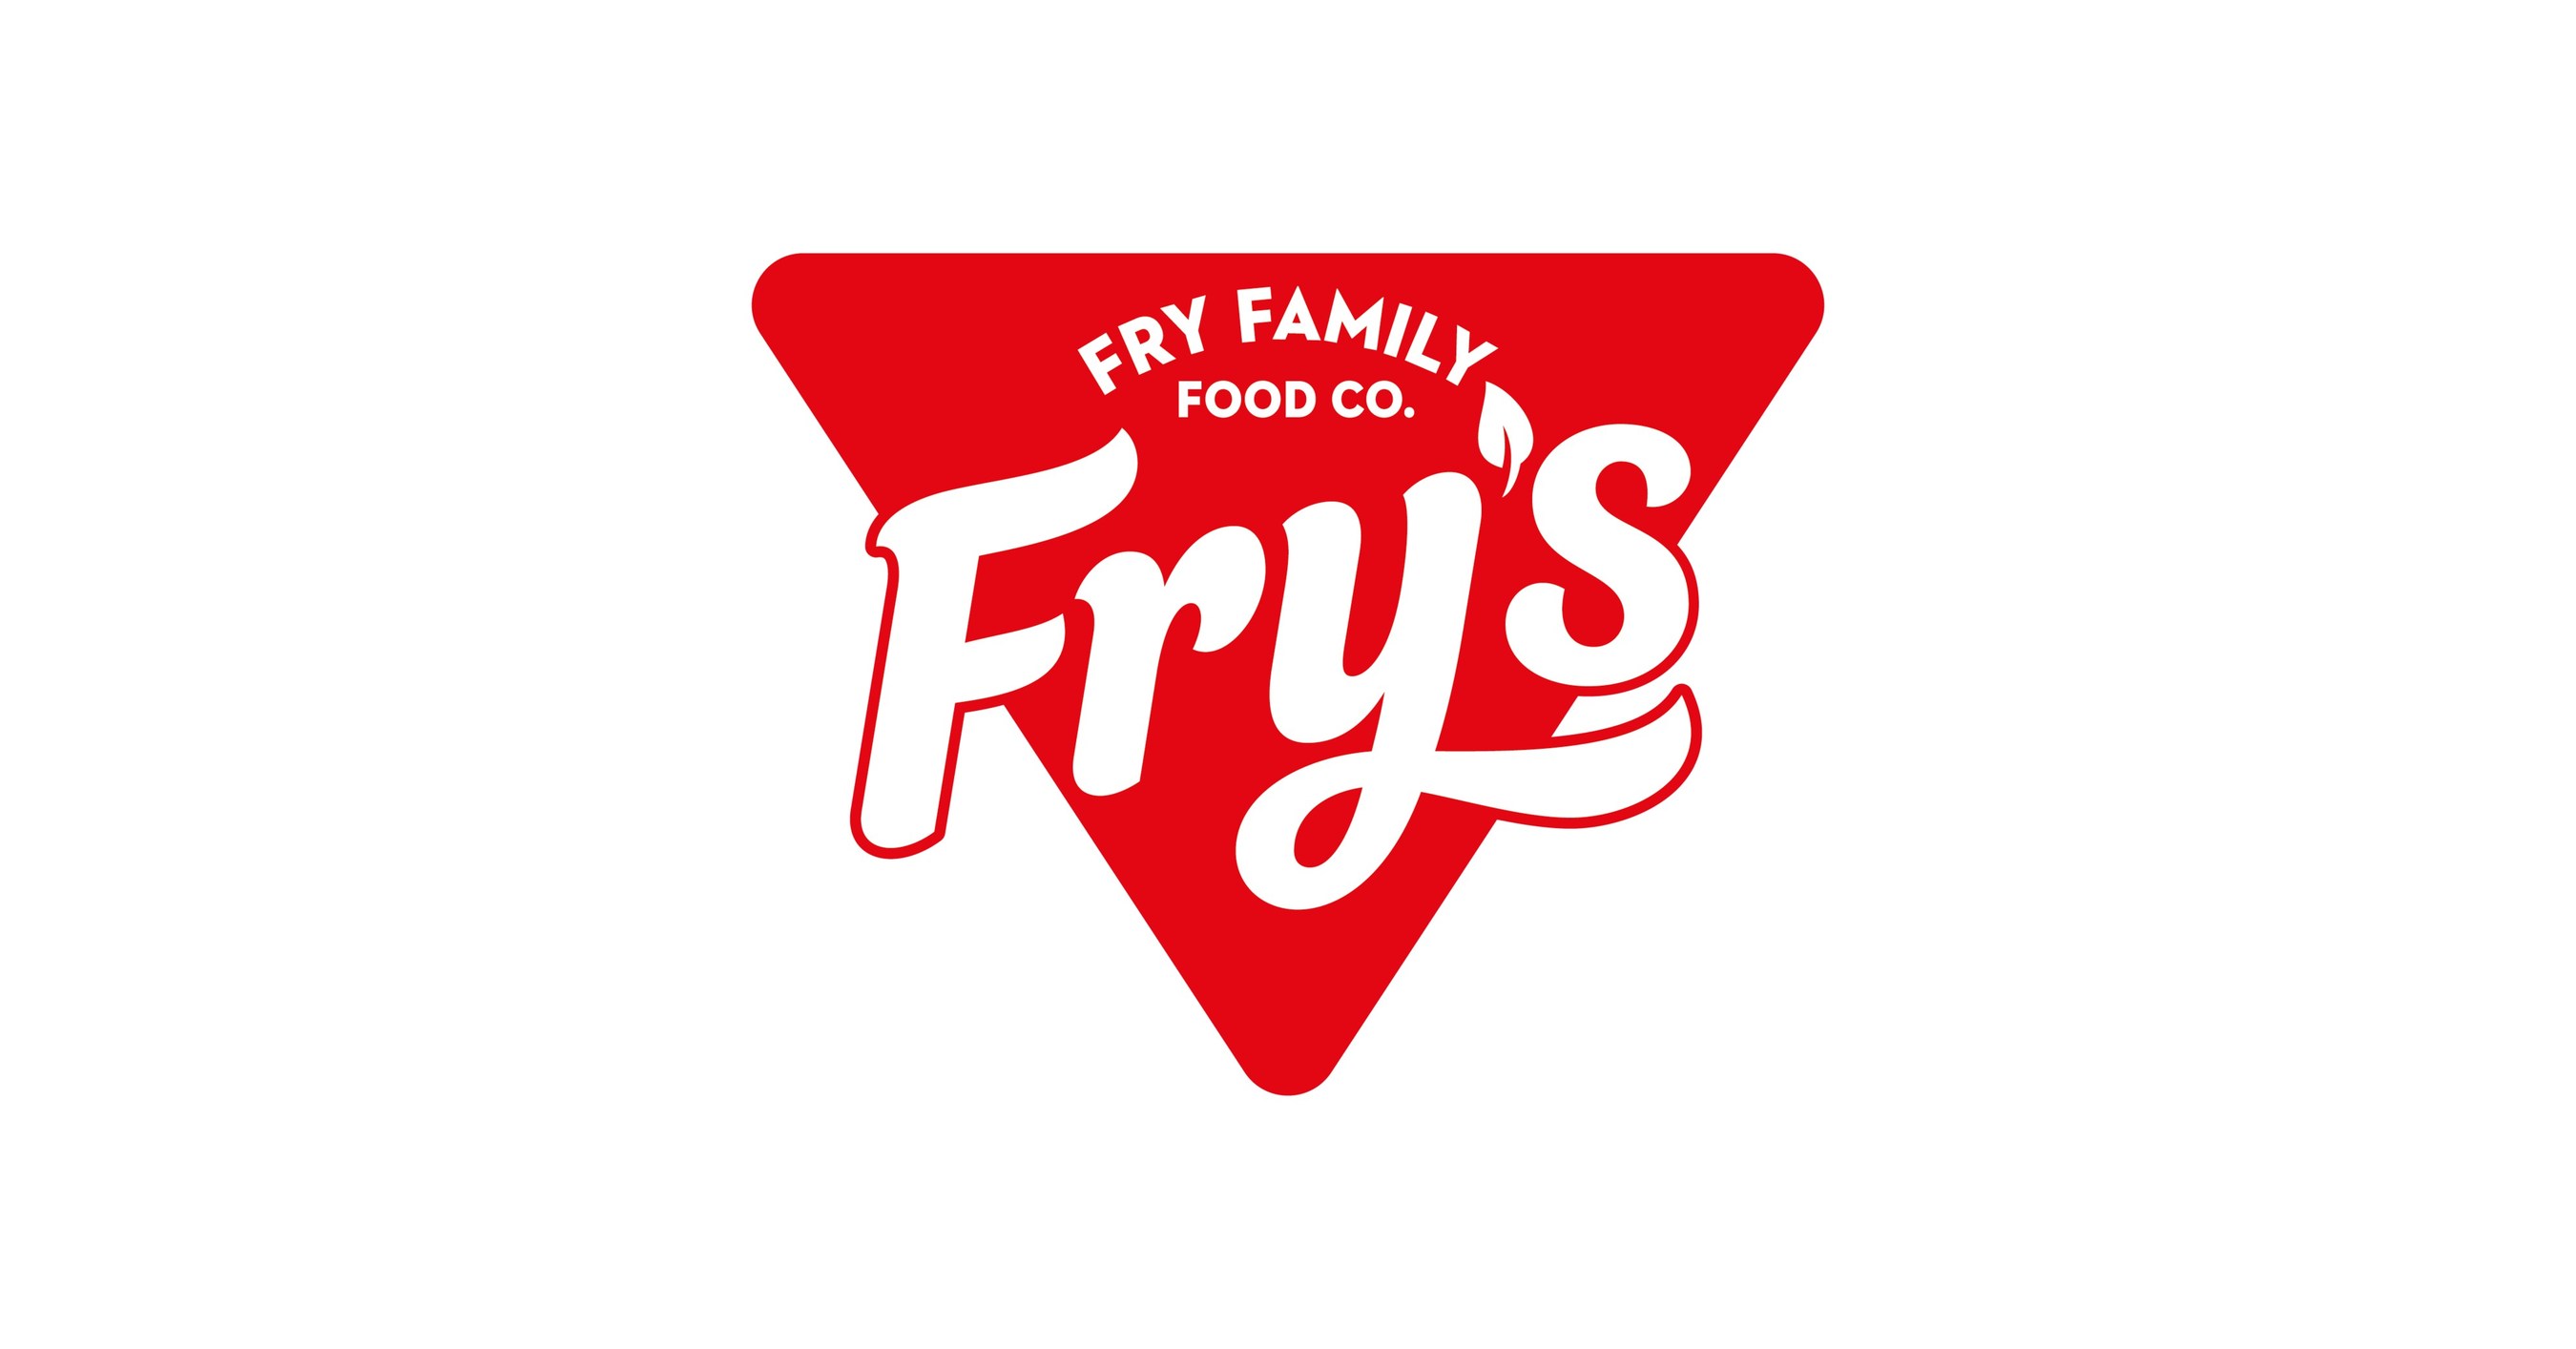 The Fry Family